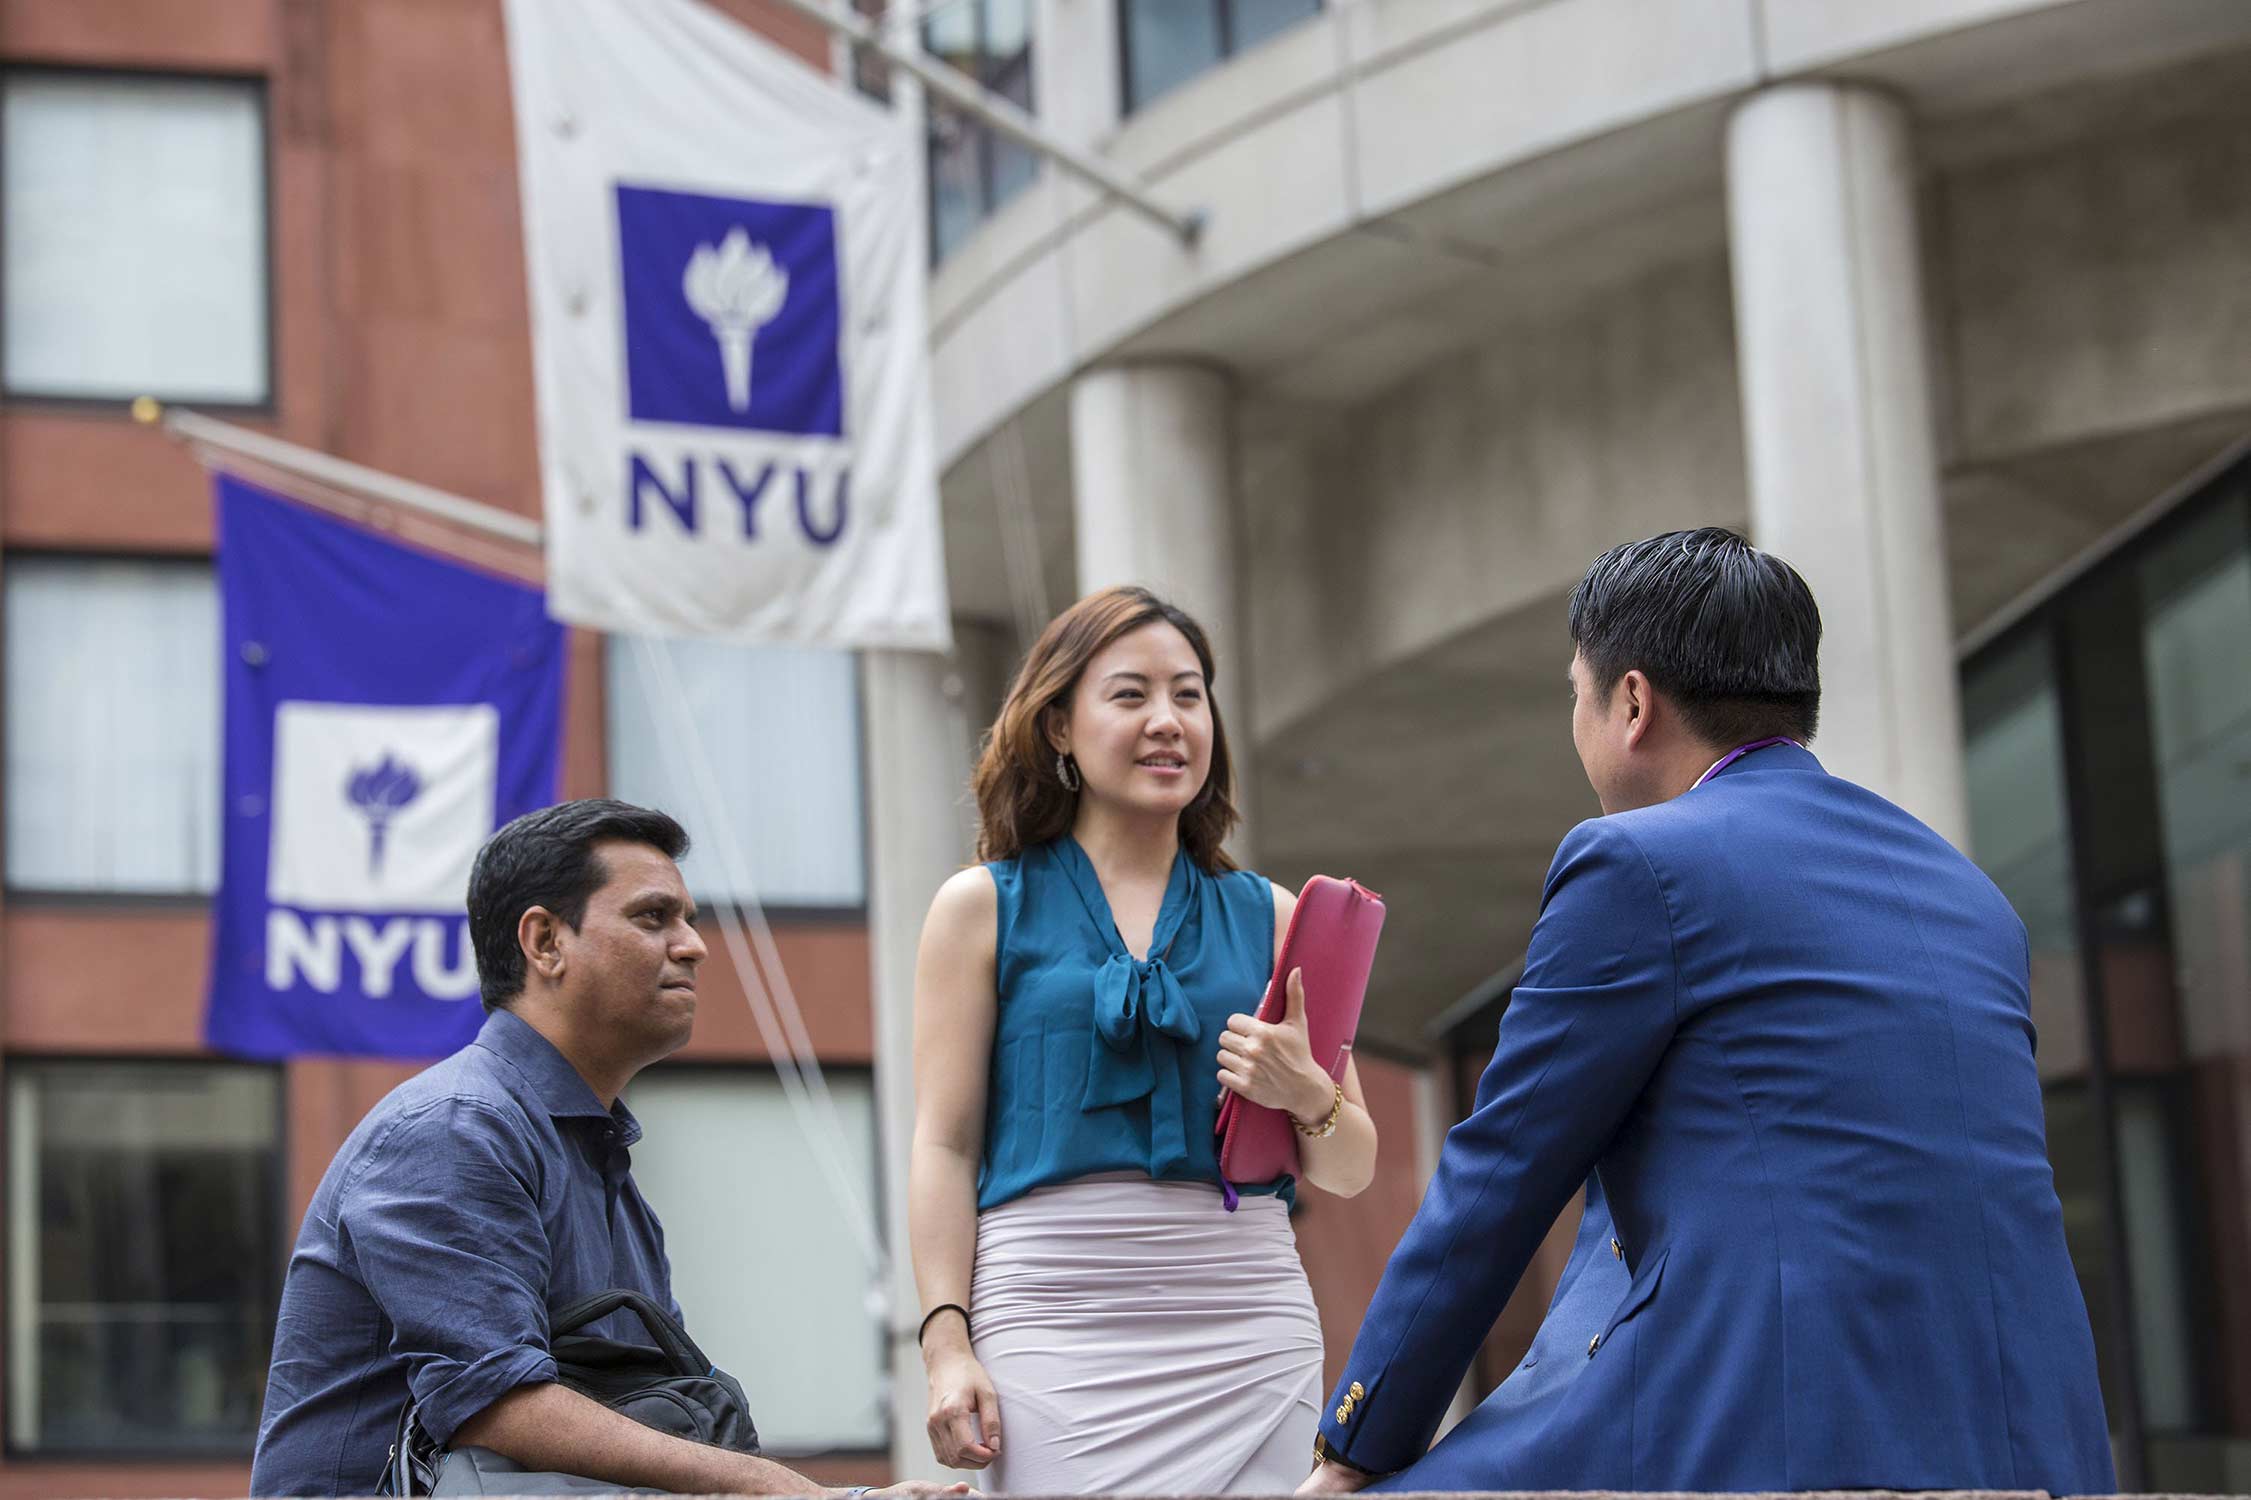 Executive course participants chatting outside of NYU Stern